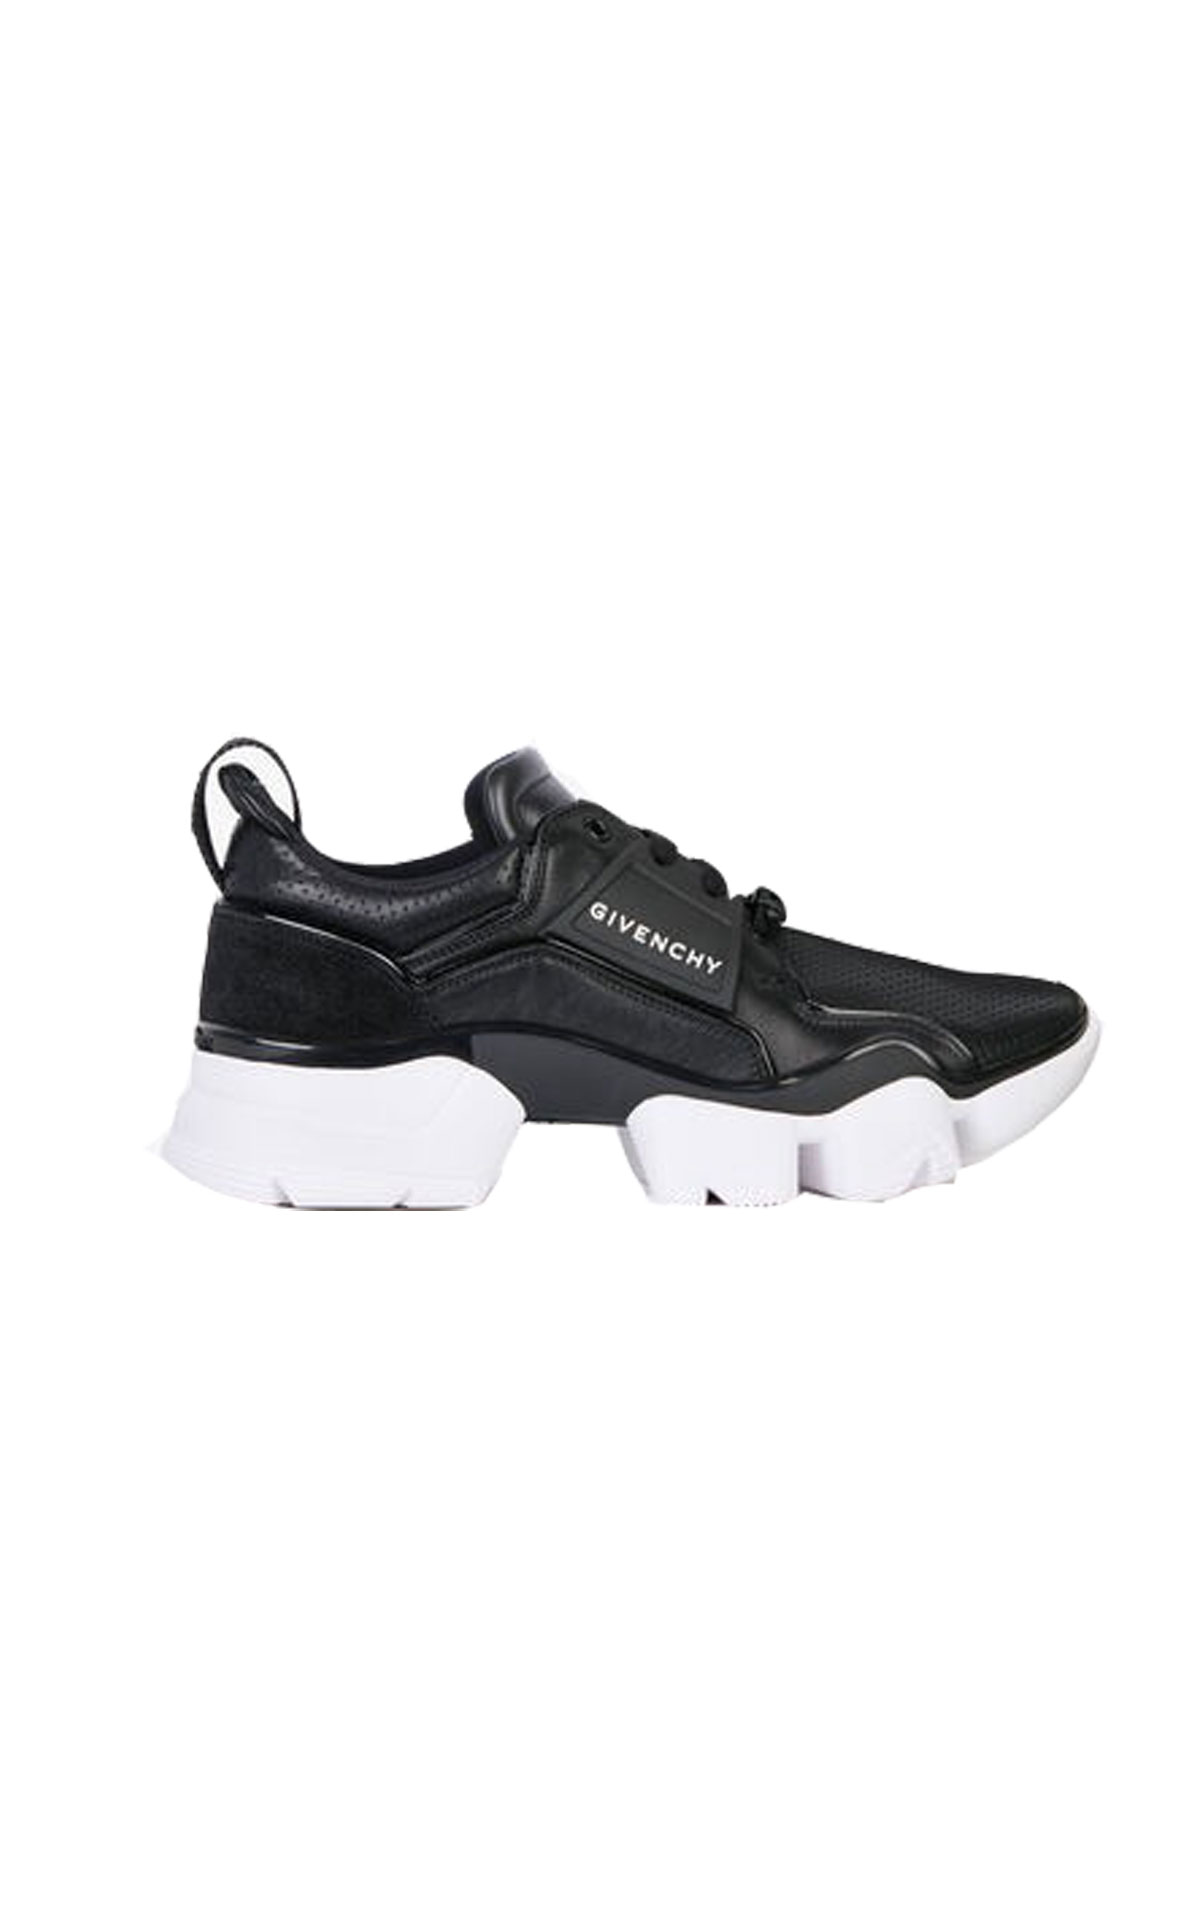 Givenchy Jaw sneaker low from Bicester Village